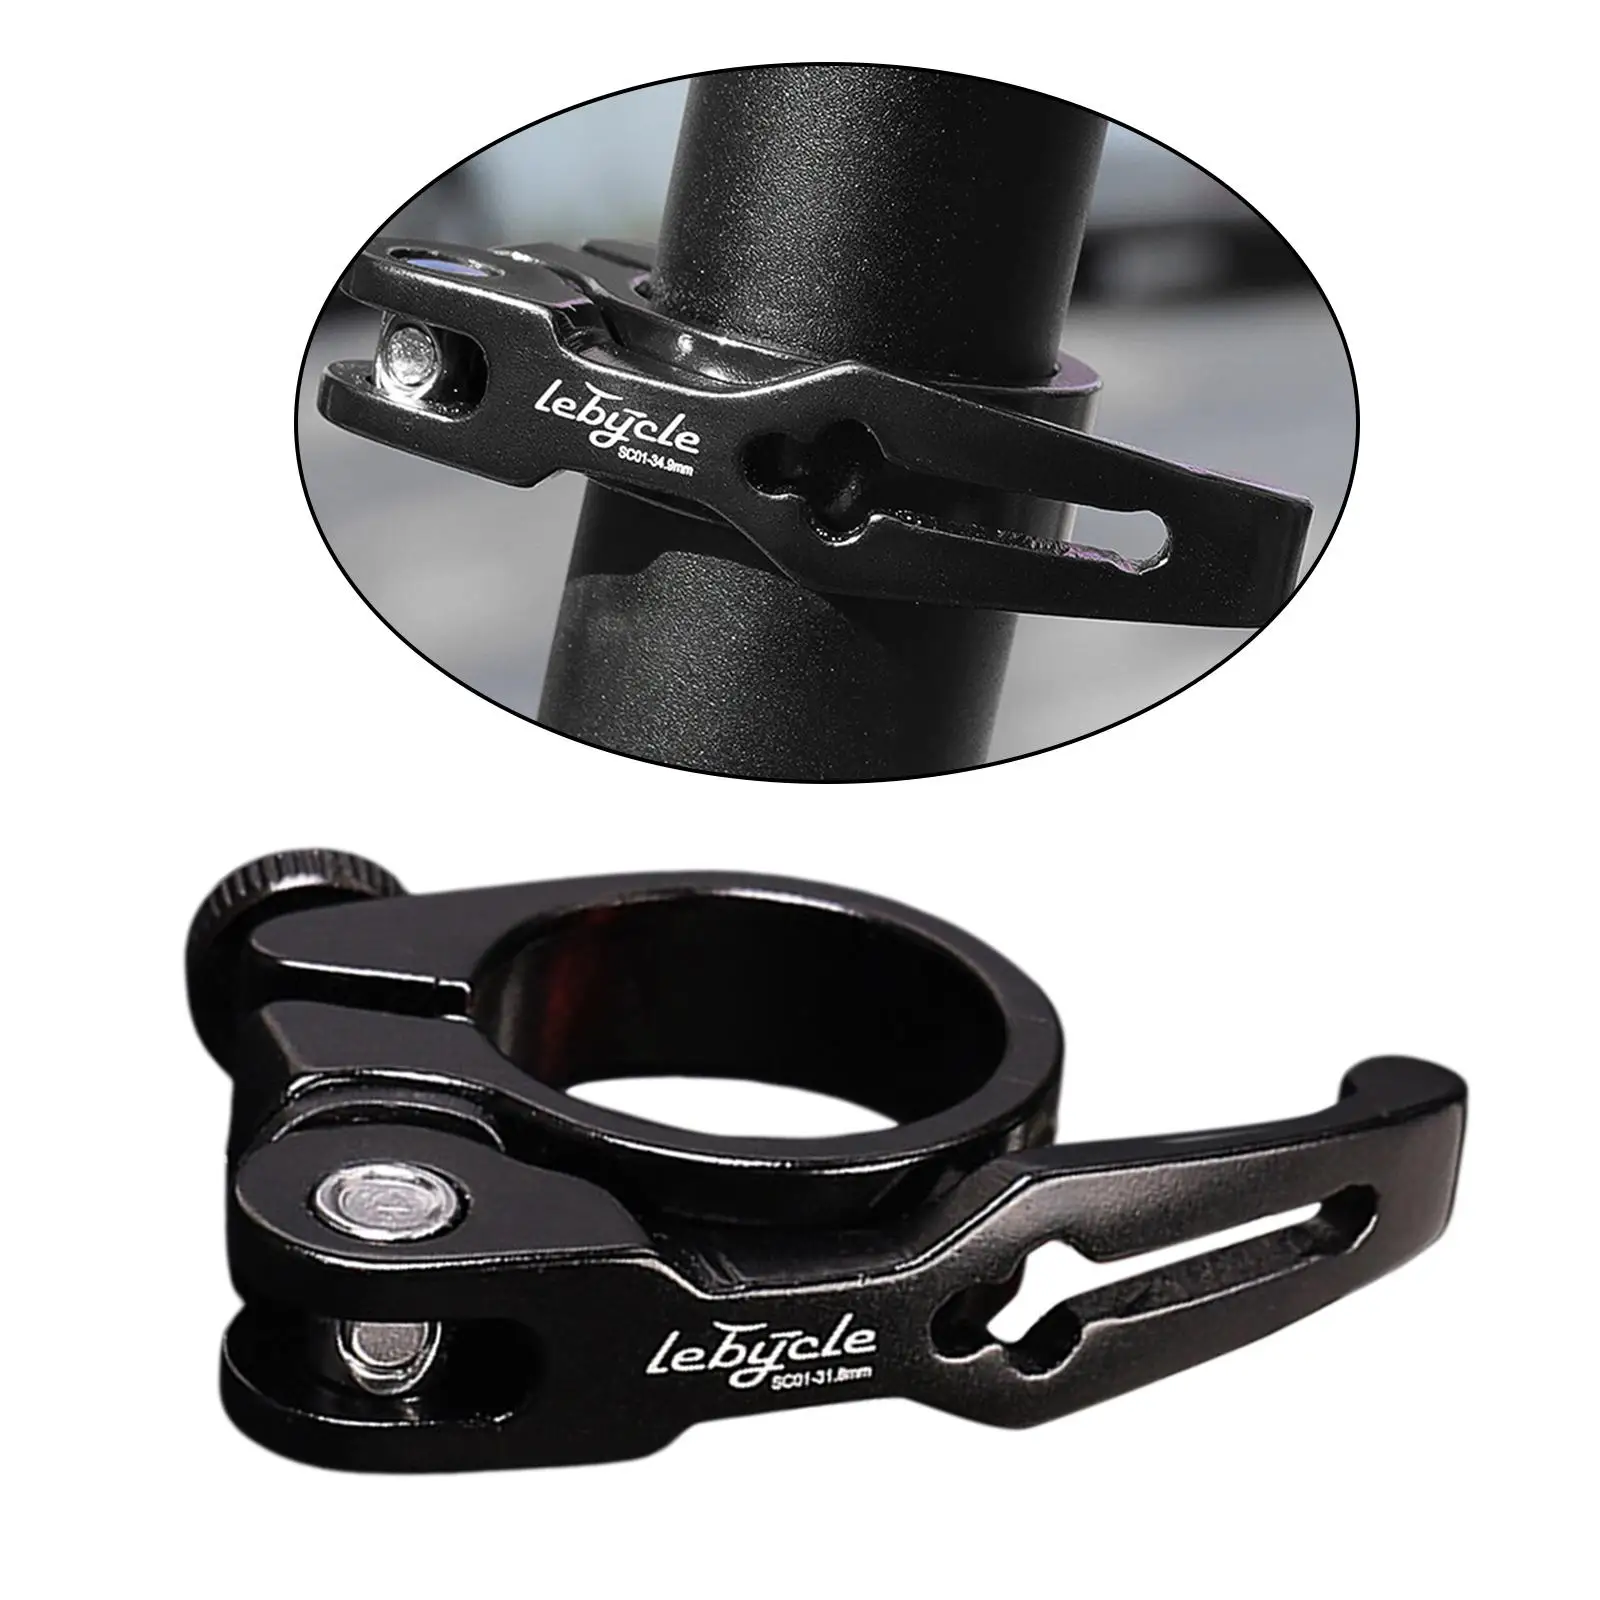 Bike Seatpost Clamp Quick Release MTB Road Bicycle Cycling Saddle Pole Seat Post Collar Clip 31.8mm OR 34.9mm Components